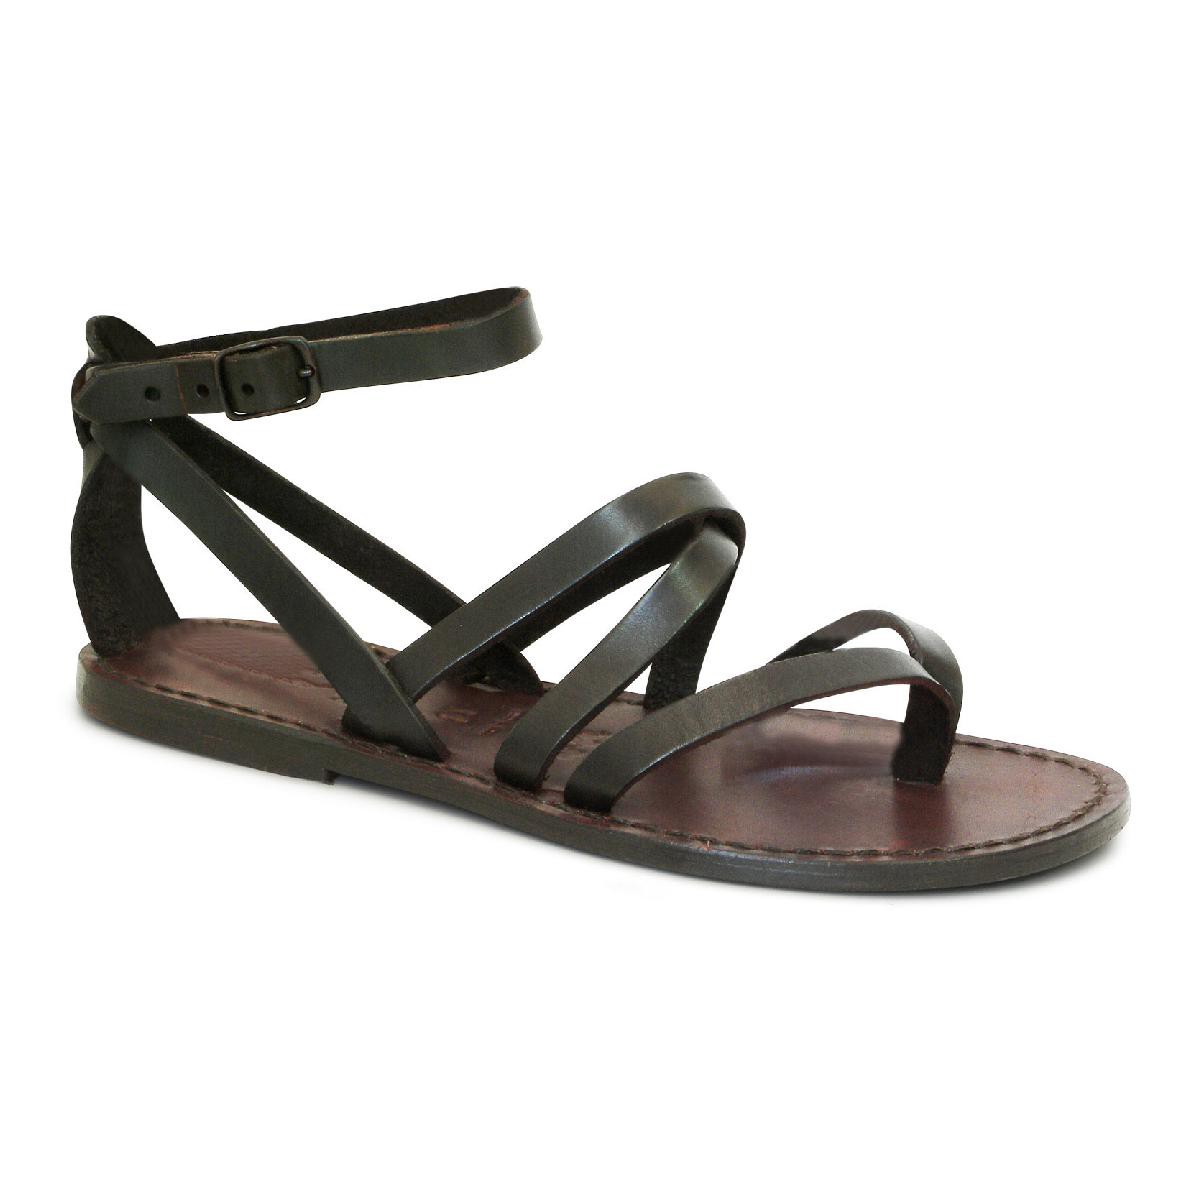 Italian Strappy Sandals Women Handmade Brown Leather 